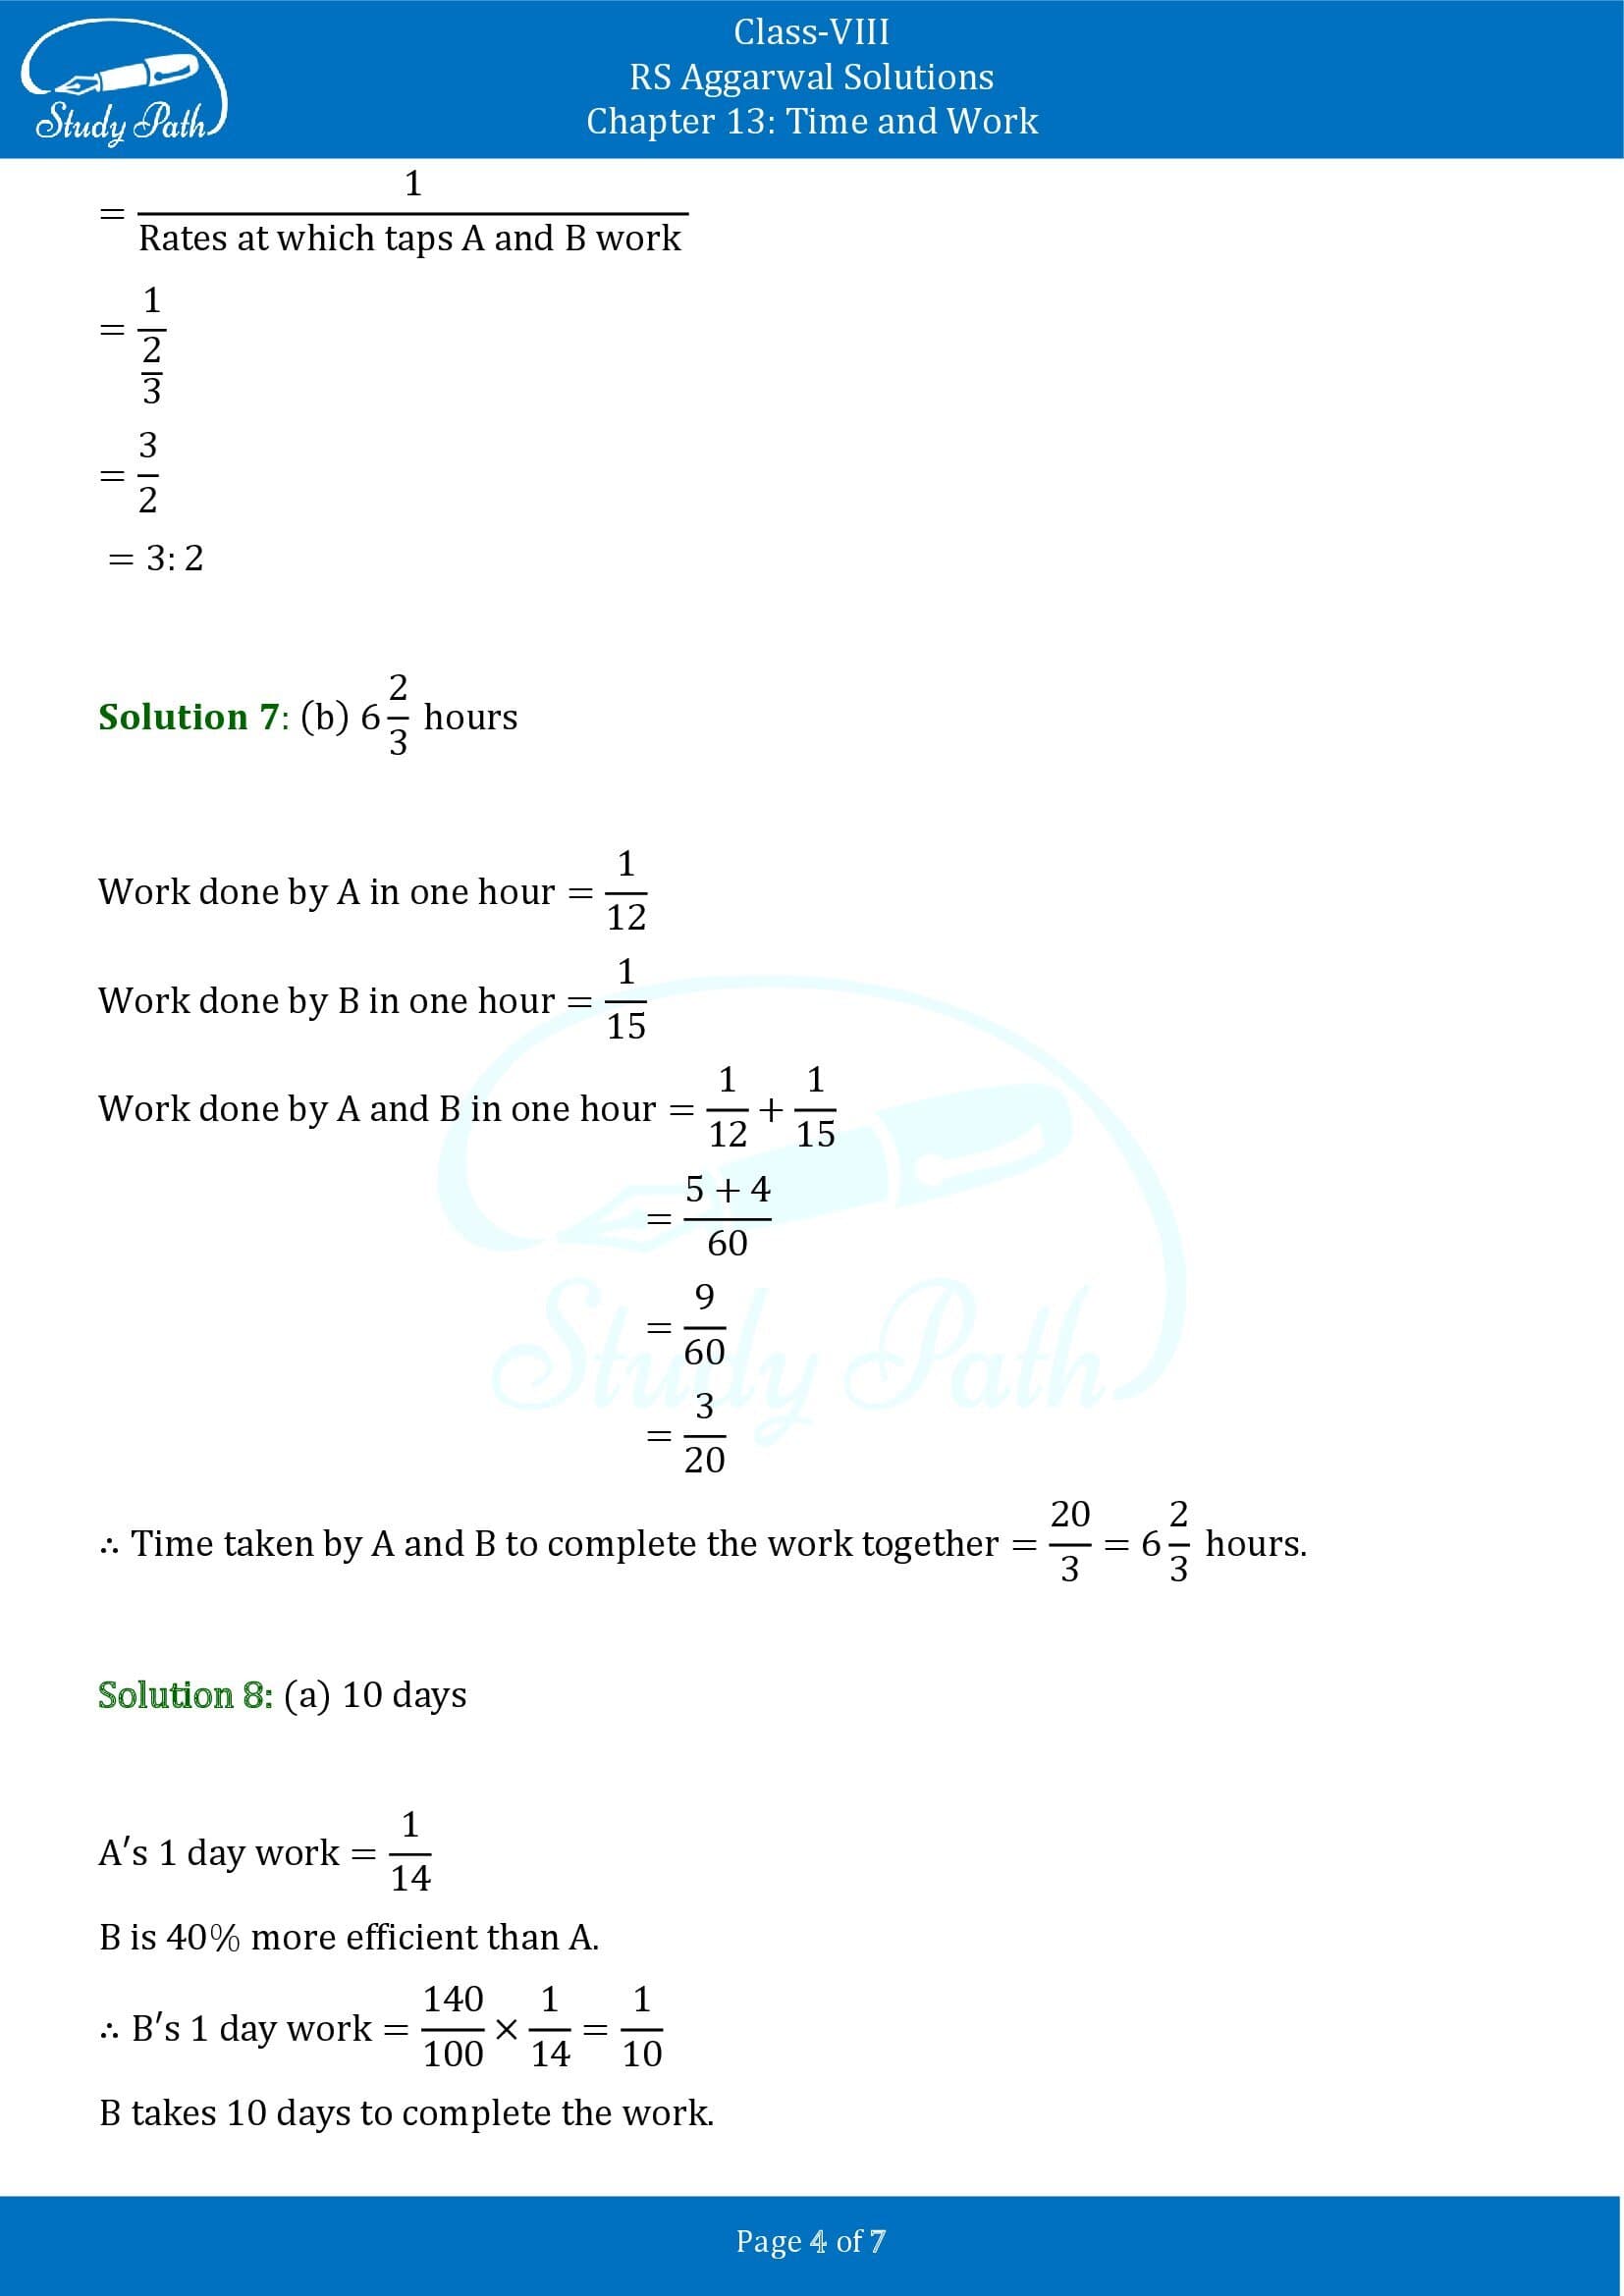 RS Aggarwal Solutions Class 8 Chapter 13 Time and Work Test Paper 00004